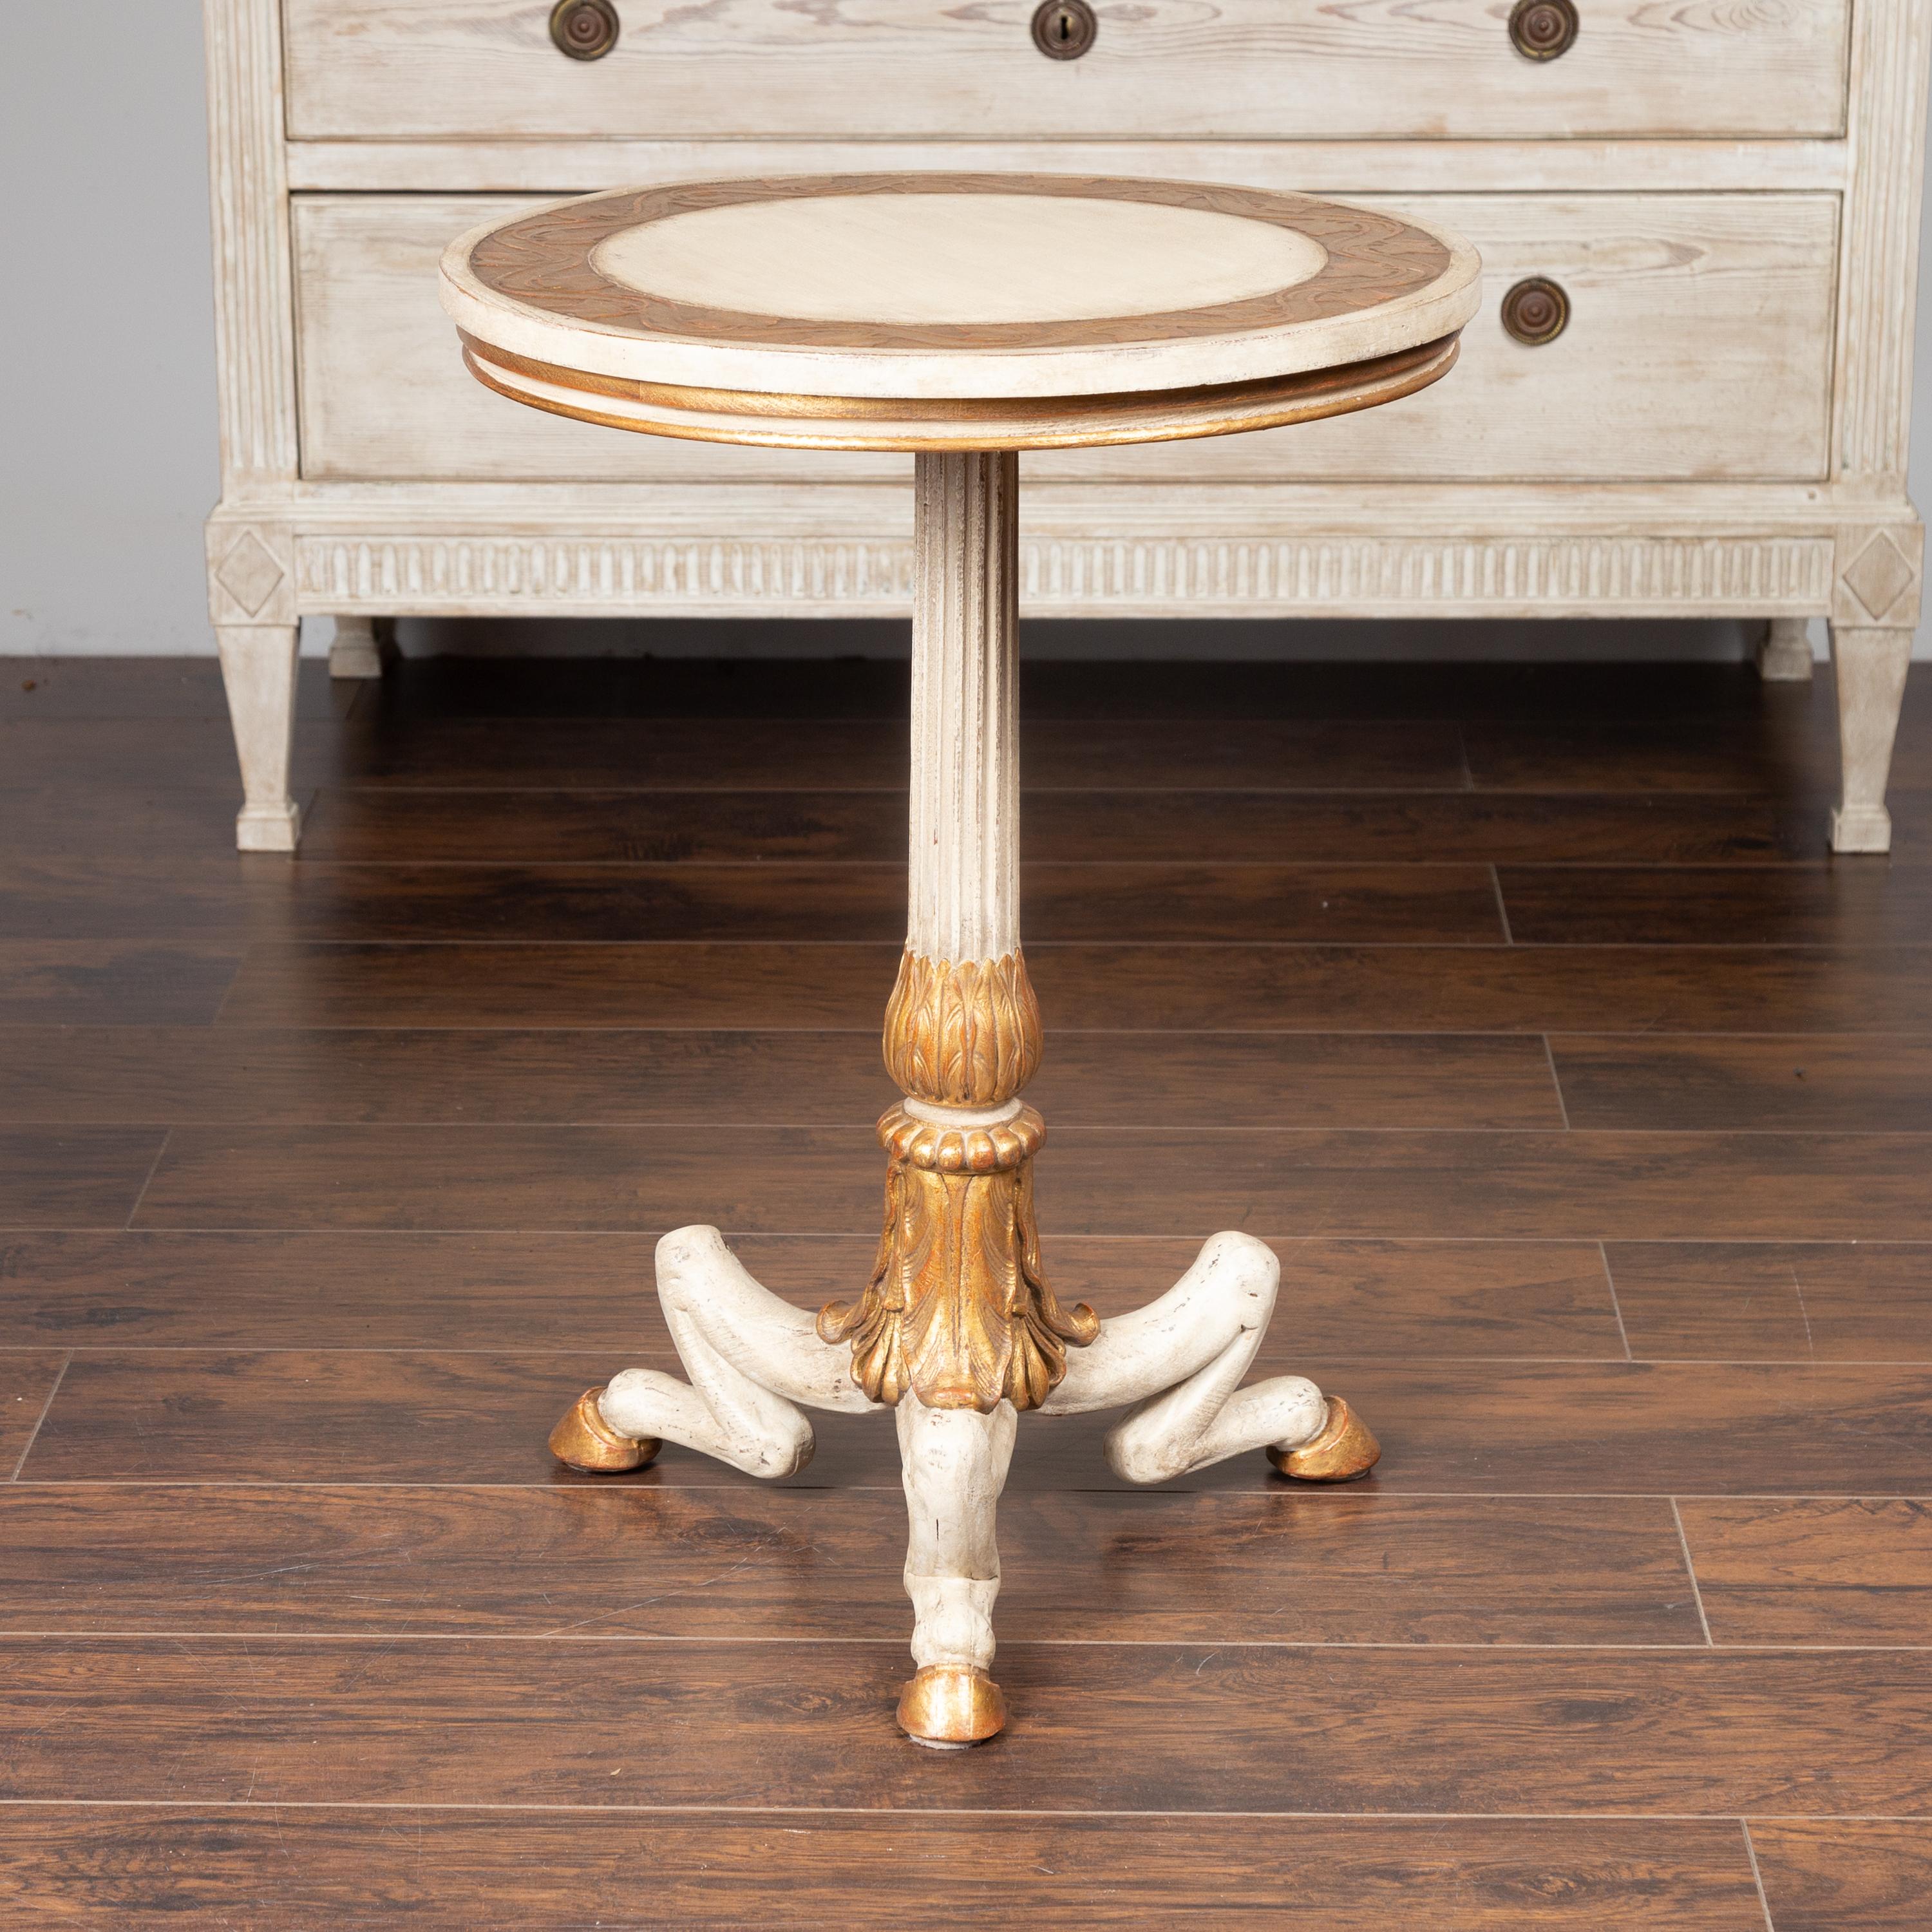 An Italian painted wood guéridon side table from the mid-20th century, with gilded accents and hoof legs. Born in Italy during the first half of the 20th century, this unusual guéridon captures our attention with its delicate contrast of colors and